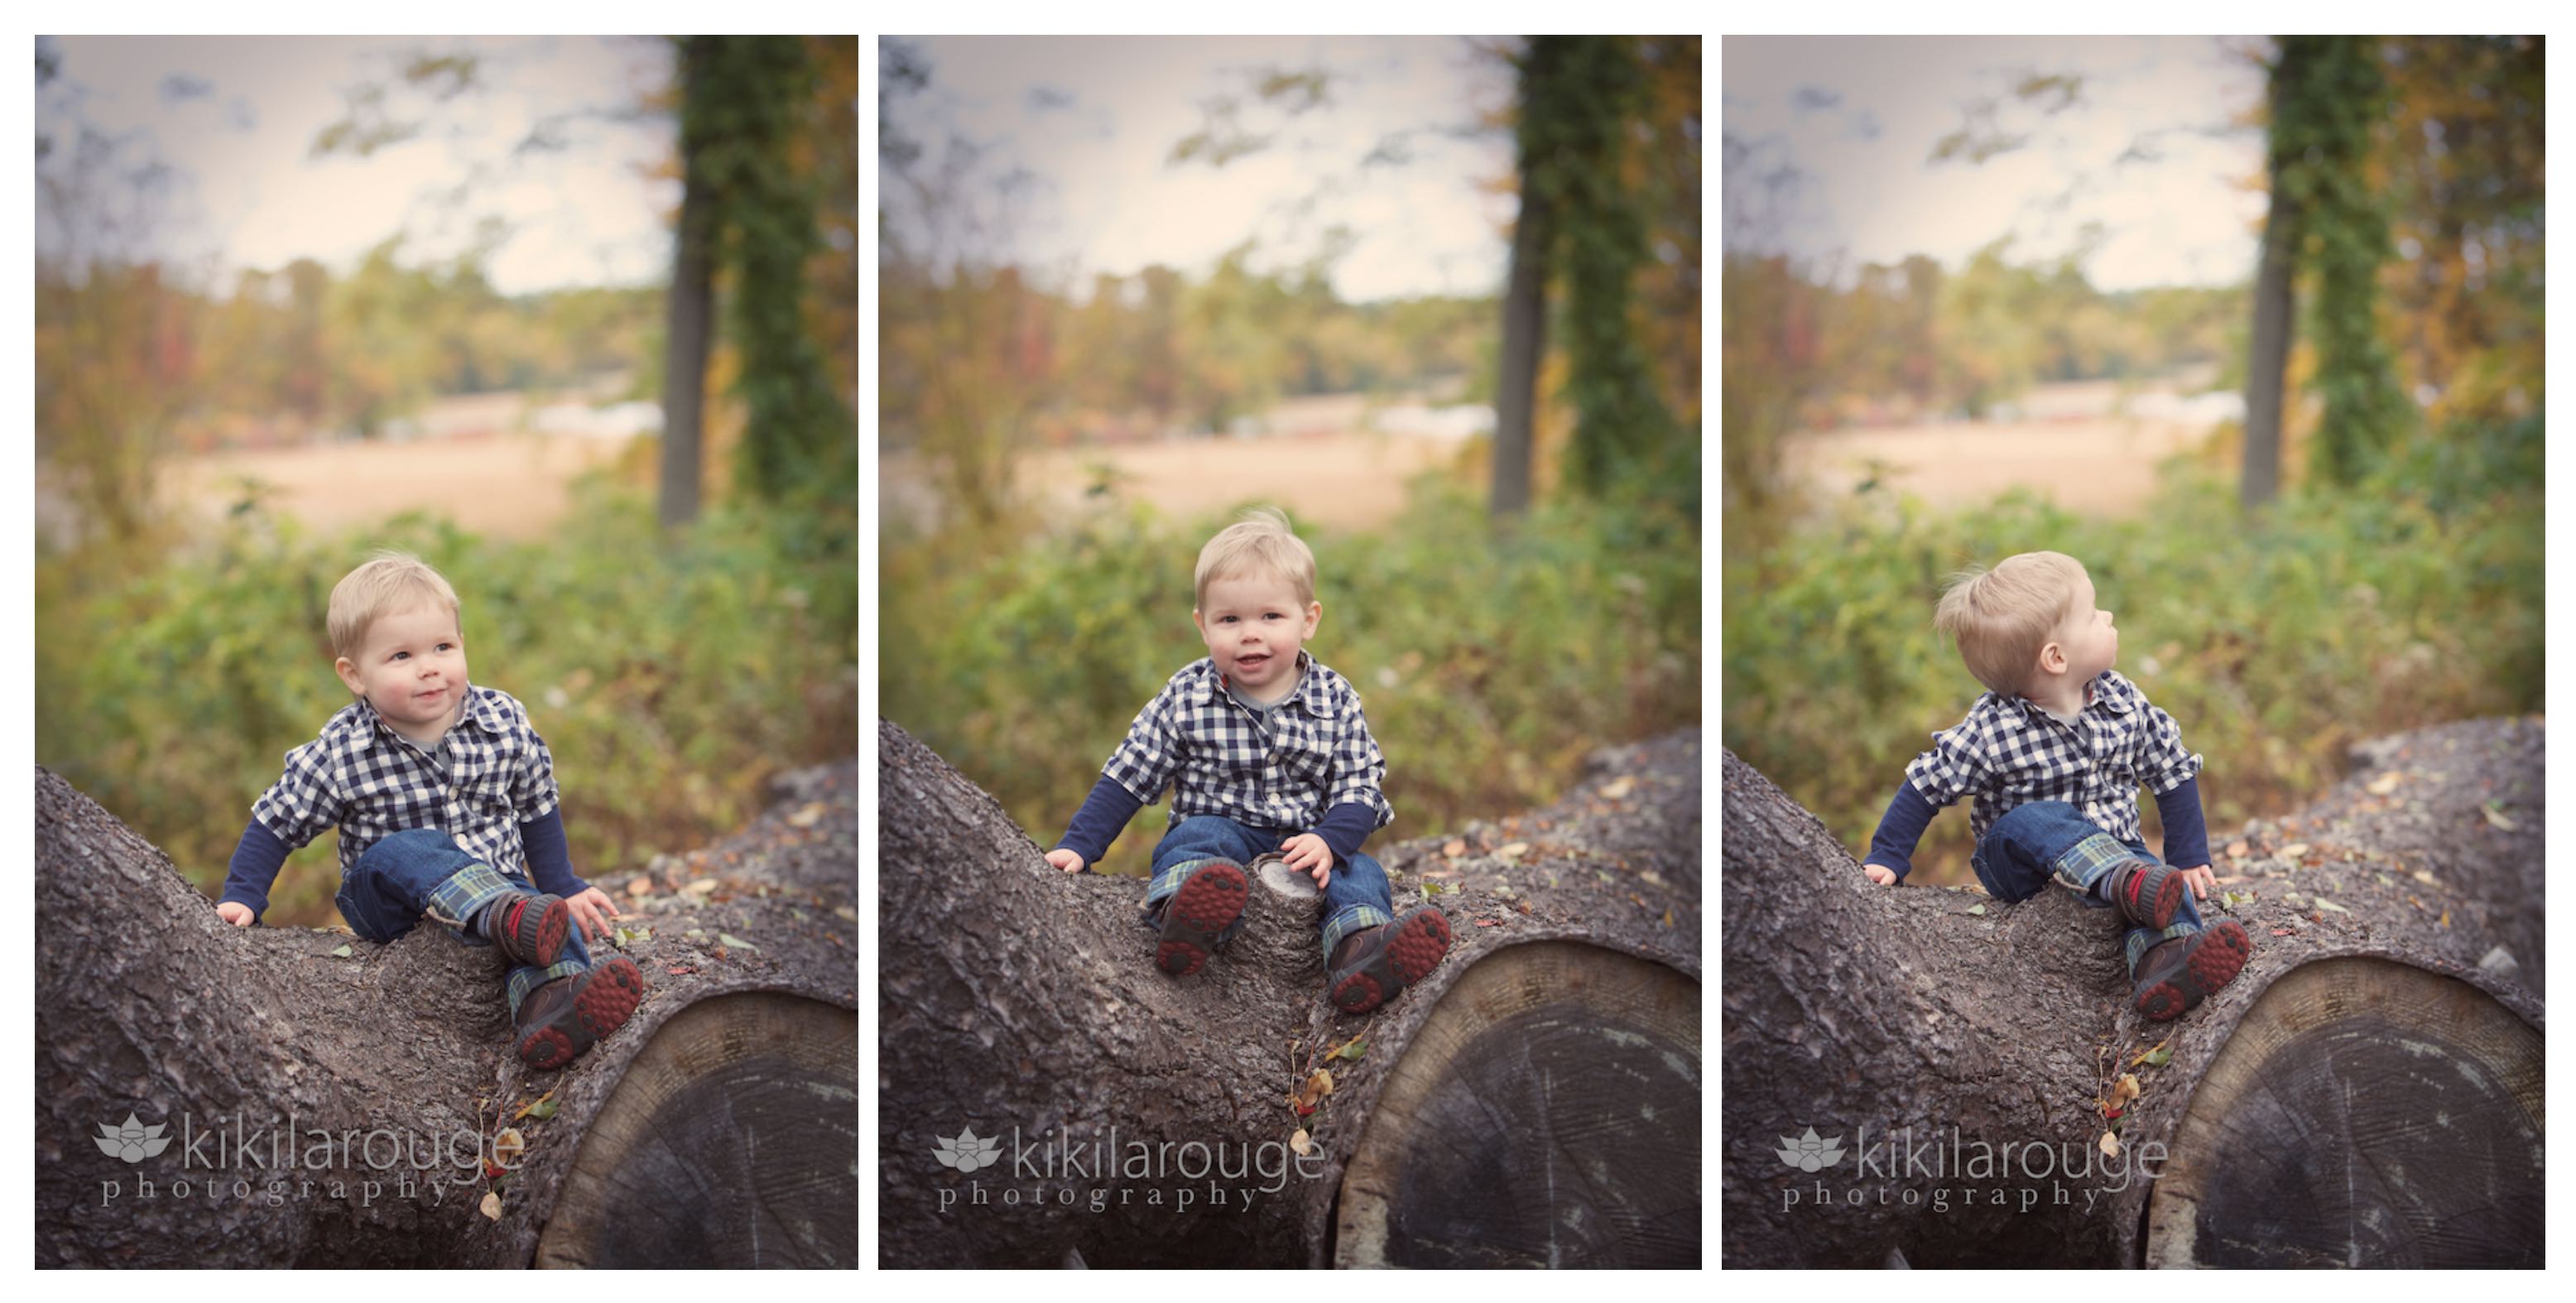 Triptych of Toddler on big log